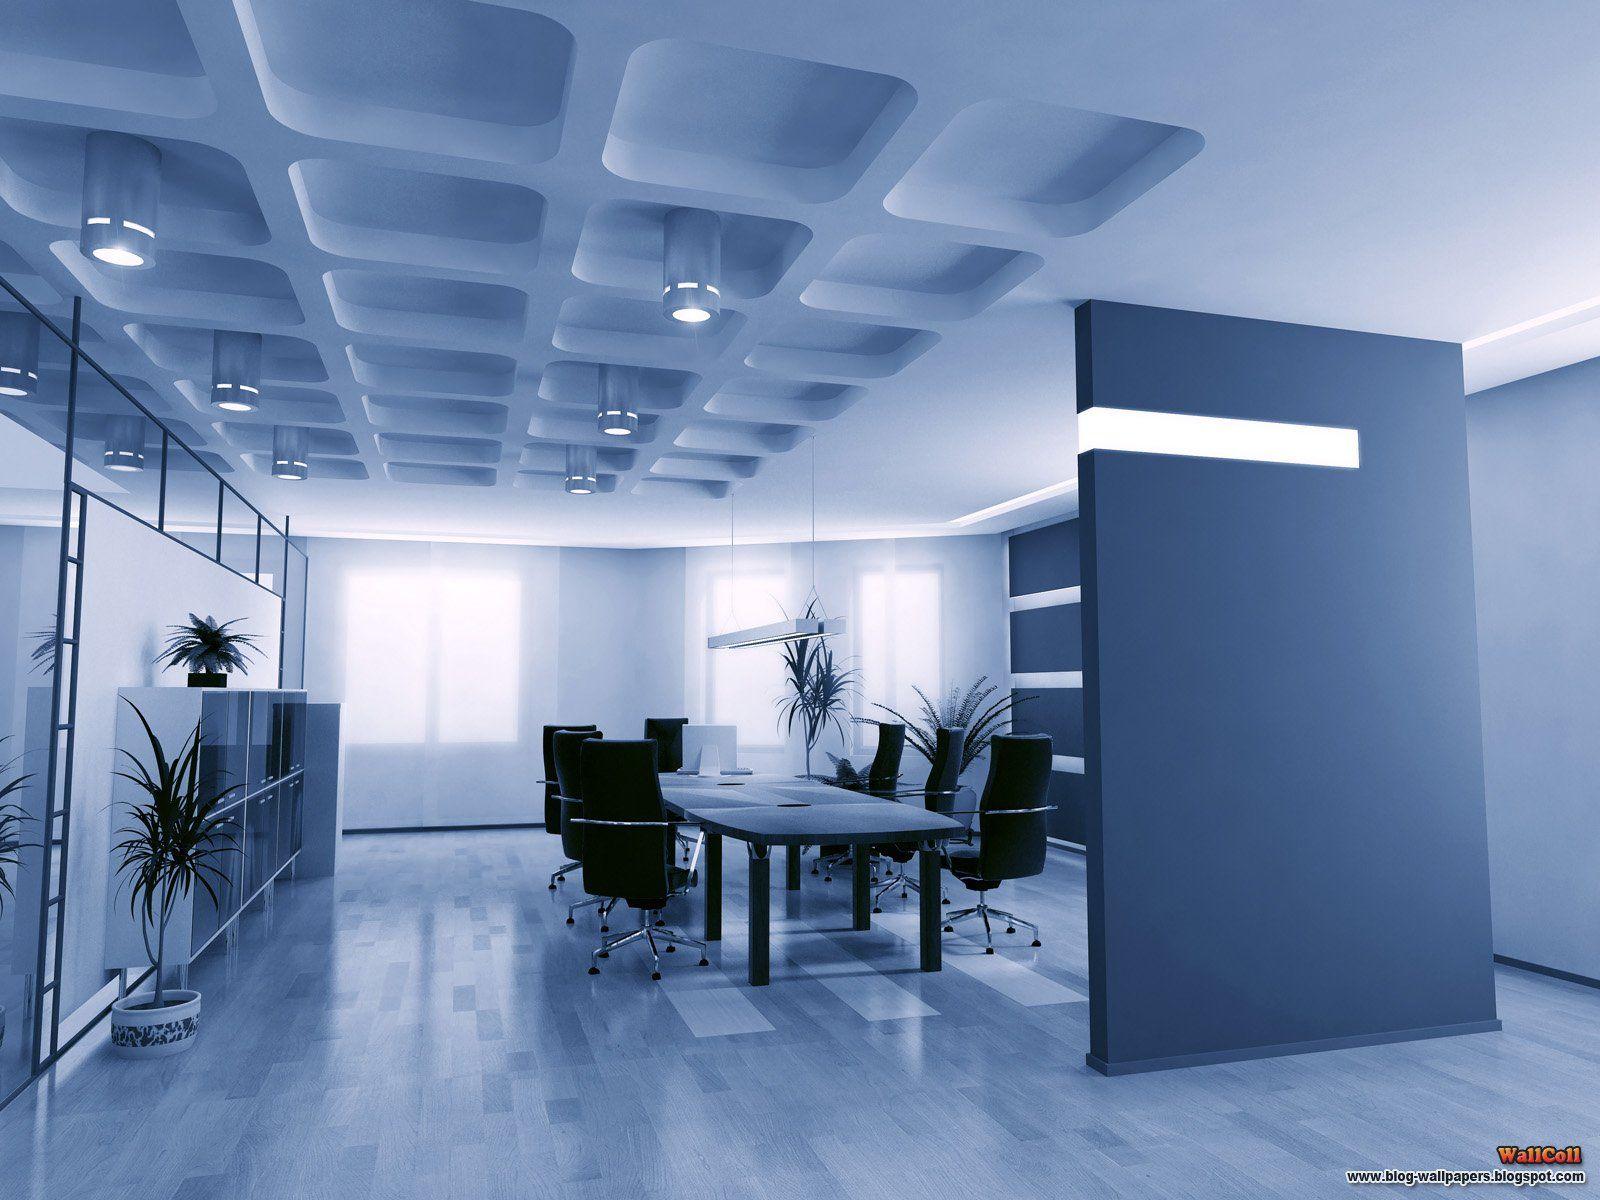 Blue Shade Interior Office Design With Unique Ceiling Part Of idolza